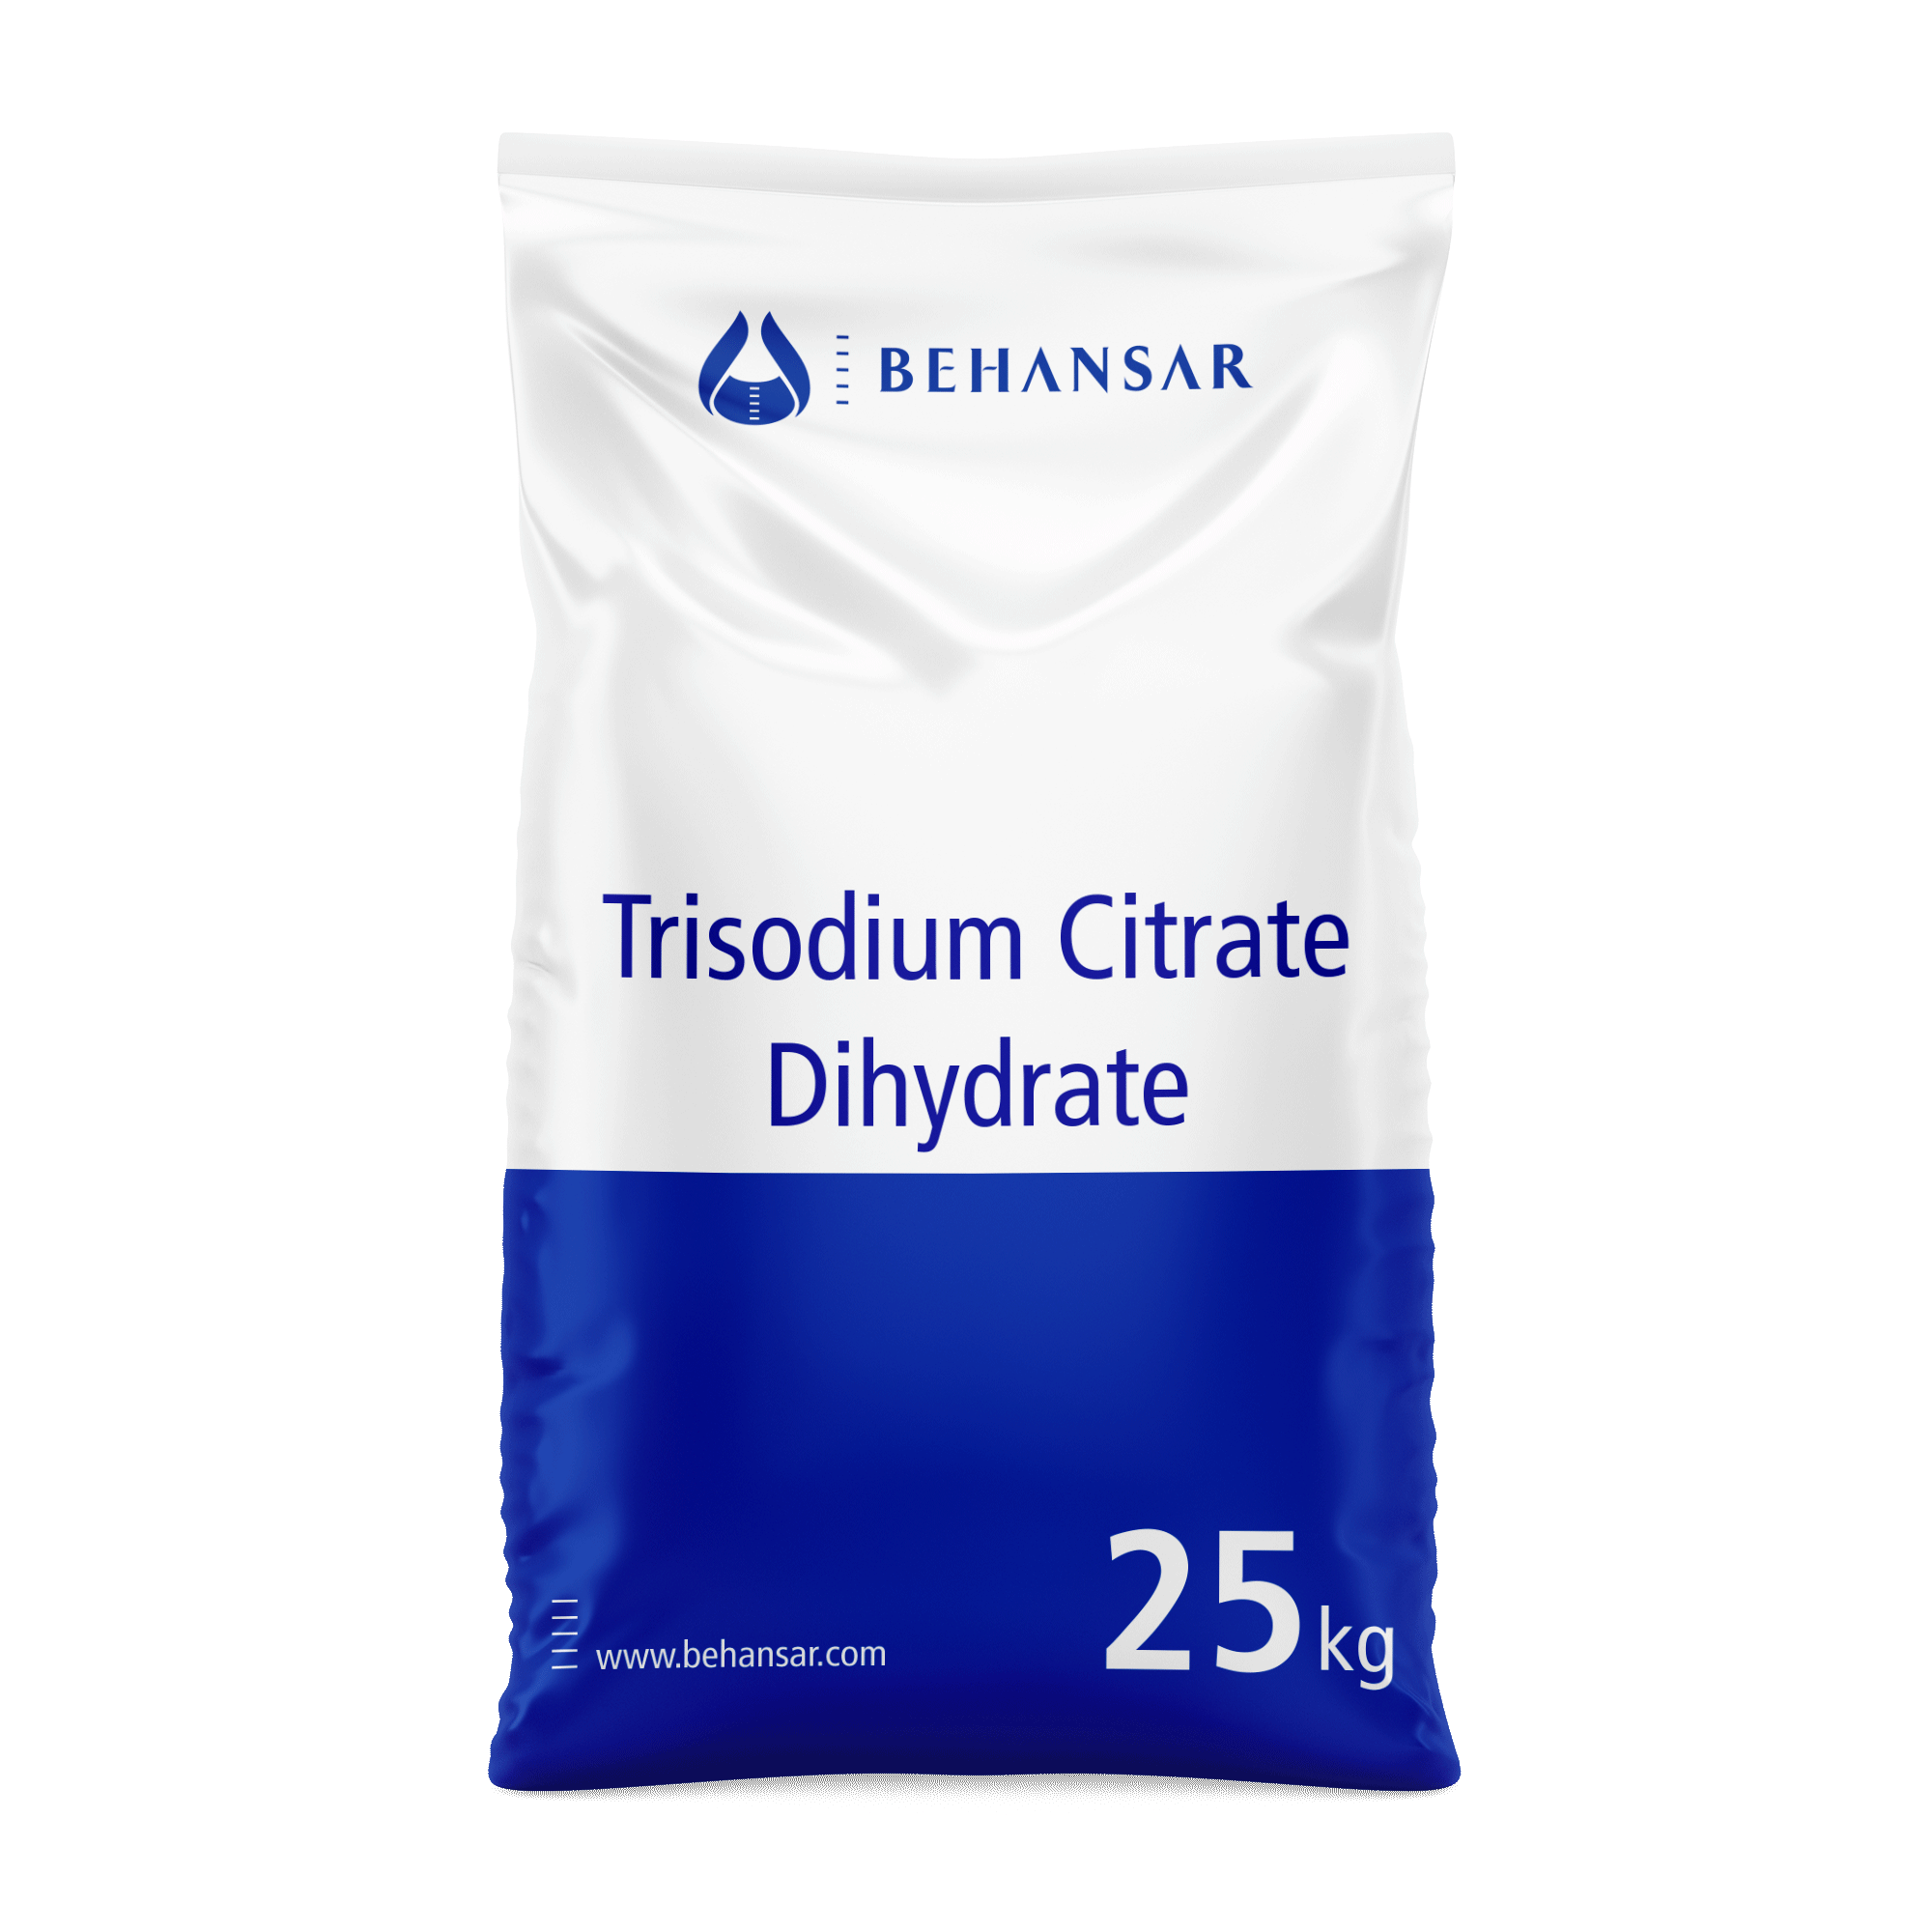 Trisodium Citrate Dihydrate is one of the products of Behansar Co